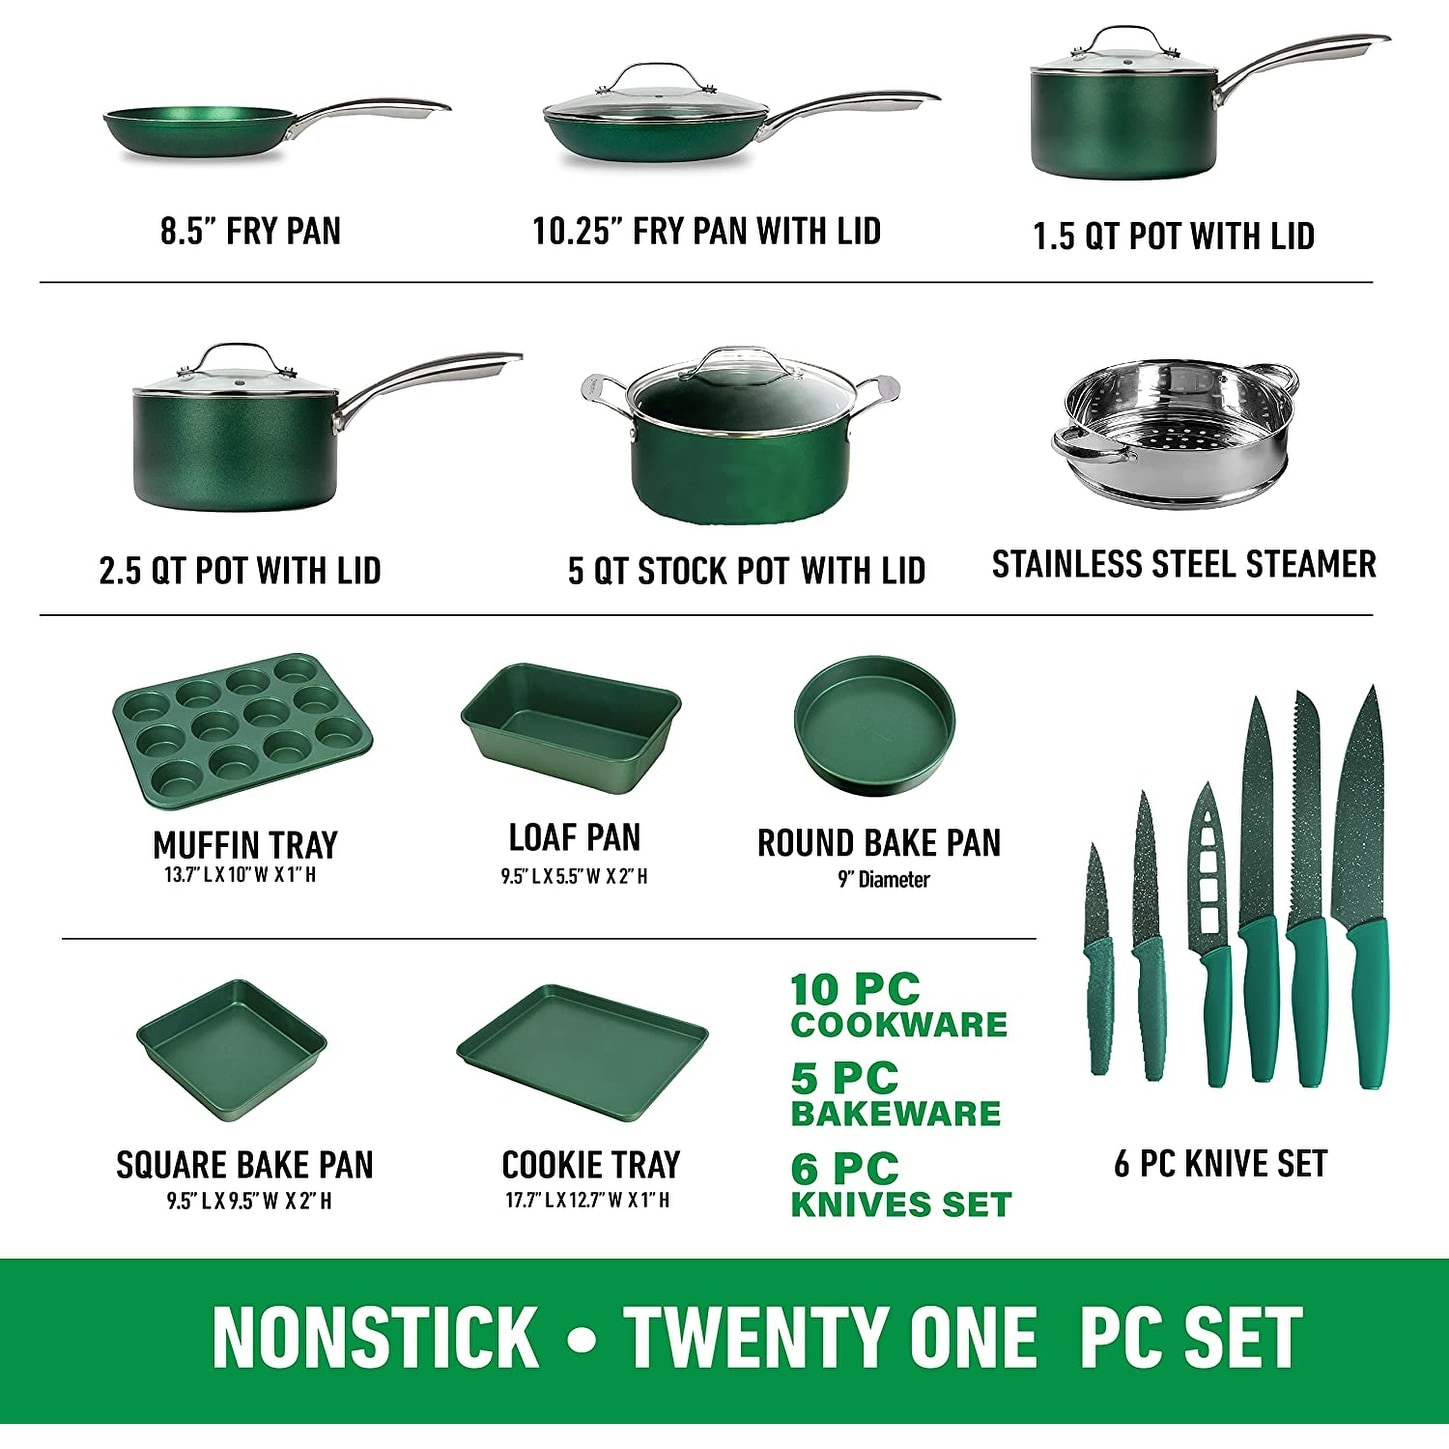 https://ak1.ostkcdn.com/images/products/is/images/direct/1868e721825e624a3bae0881fbeed2ff630d8f32/Granitestone-Emerald-Pots-and-Pans-Set-Nonstick%2C-21-Piece-Ultra-Durable-Complete-Kitchen-Cookware-Set.jpg